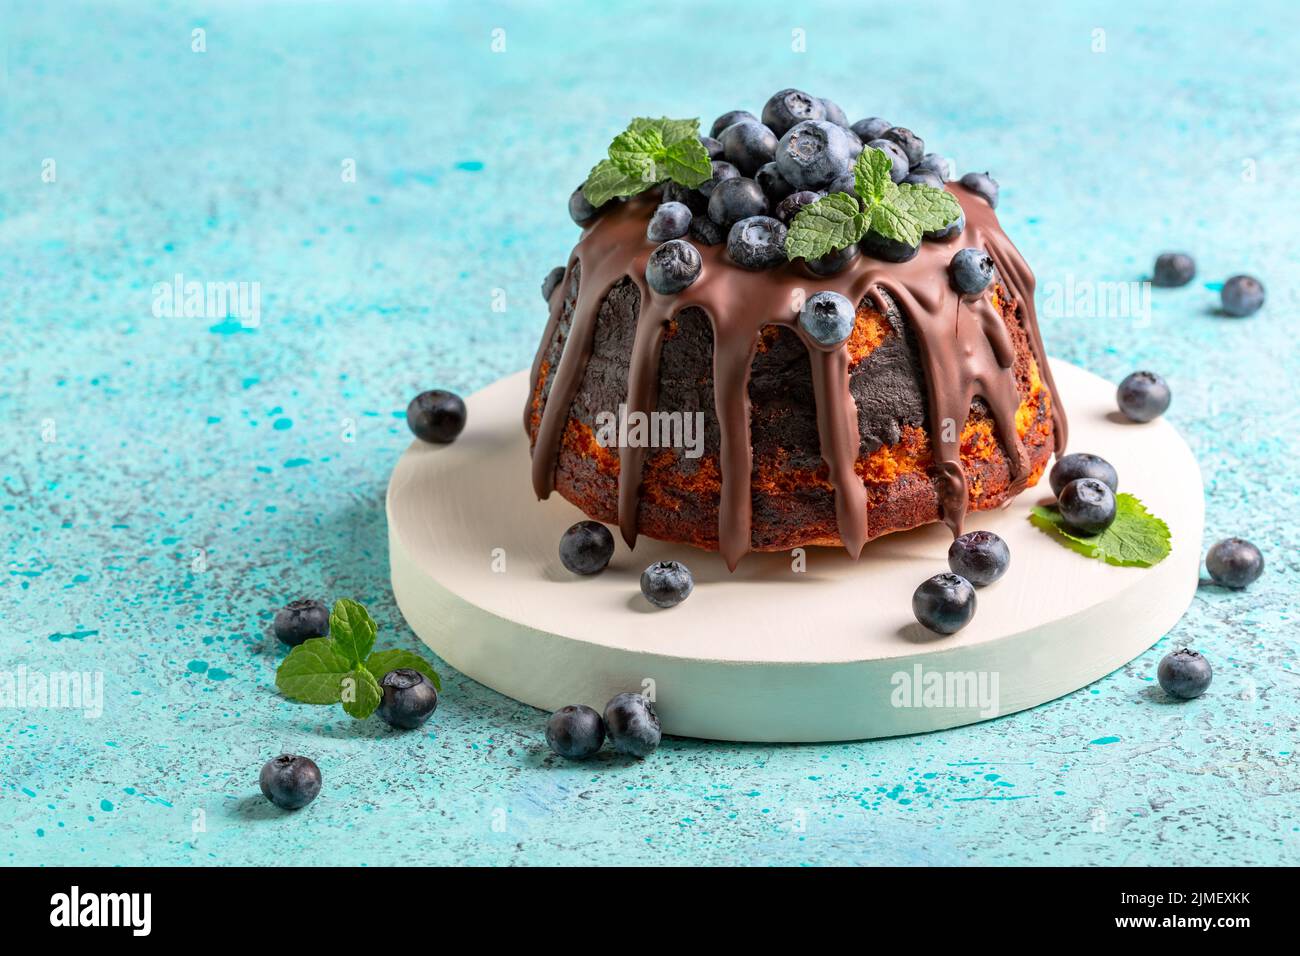 Marble bundt cake with chocolate icing and blueberries. Stock Photo